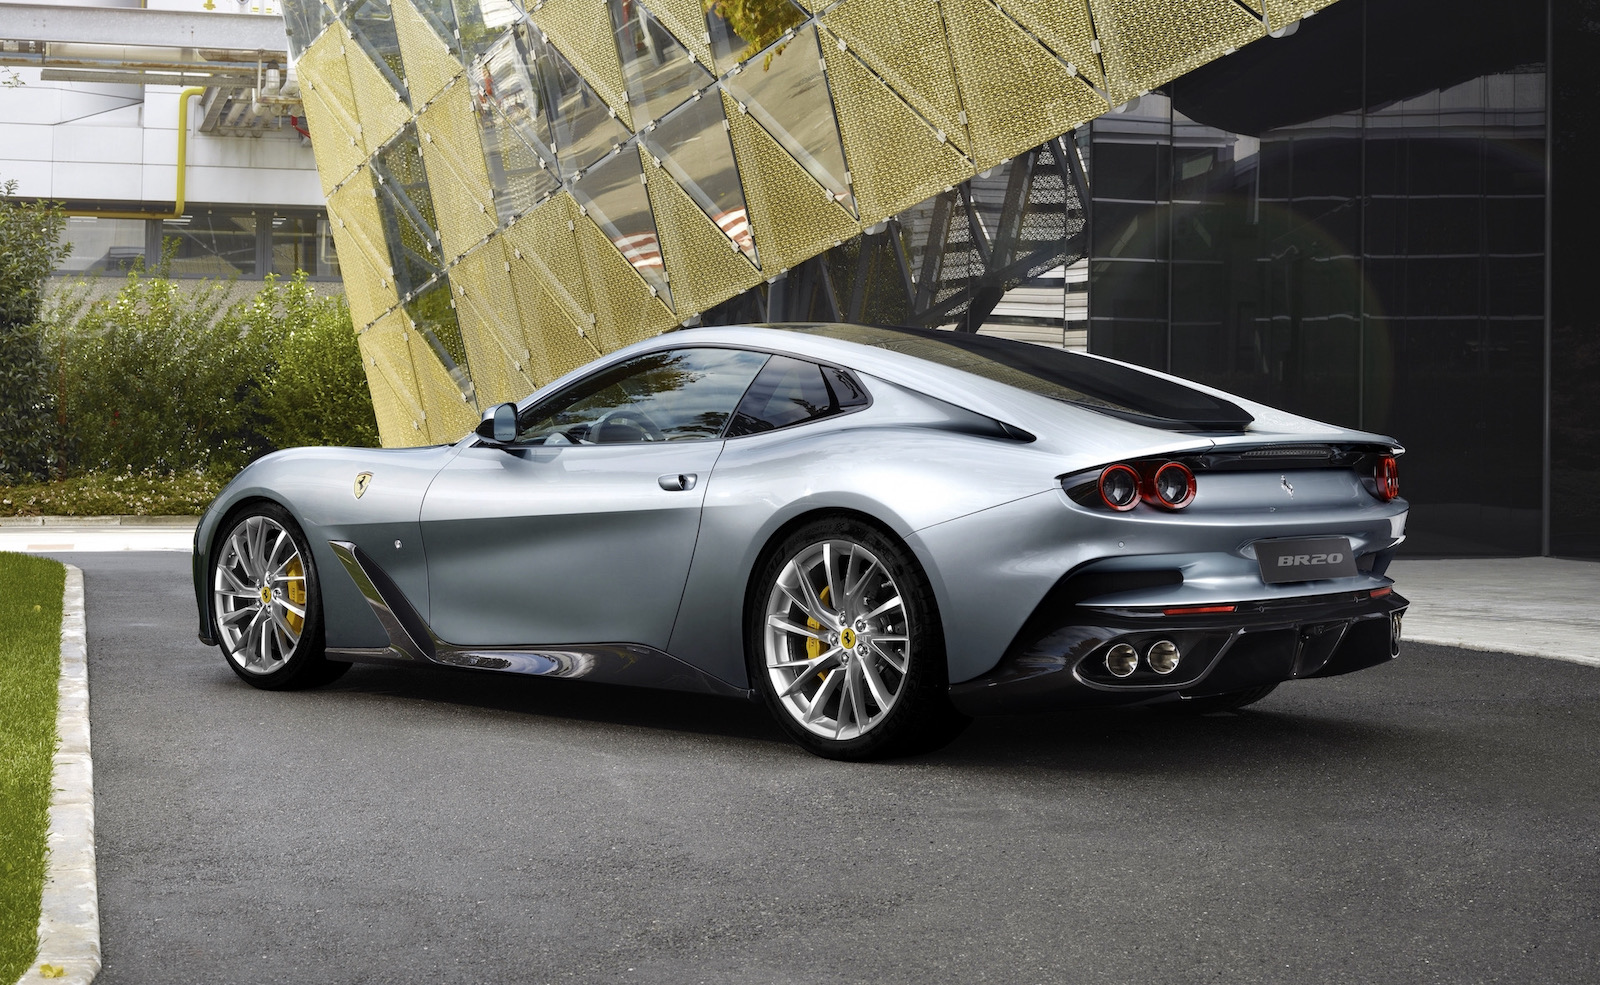 Ferrari BR20 one-off special project revealed, based on GTC4Lusso